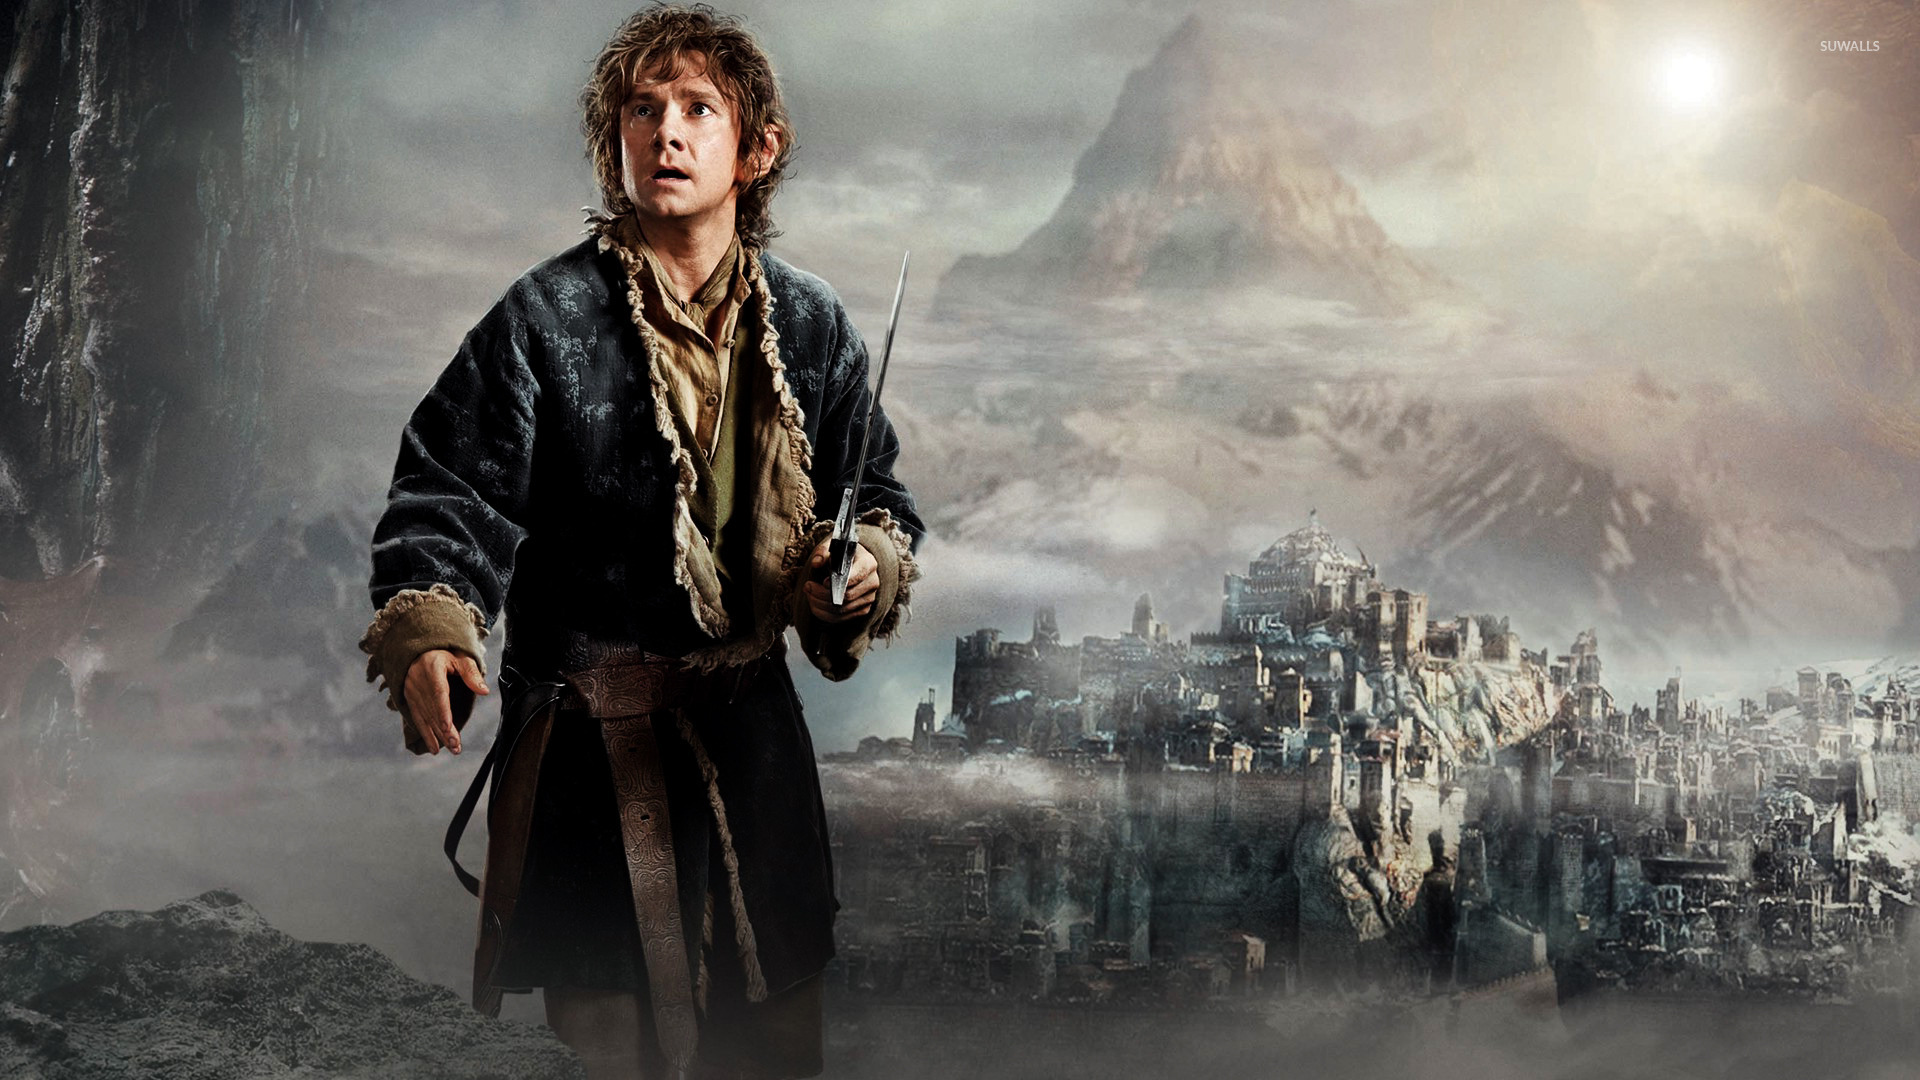 download the new version for iphoneThe Hobbit: The Desolation of Smaug